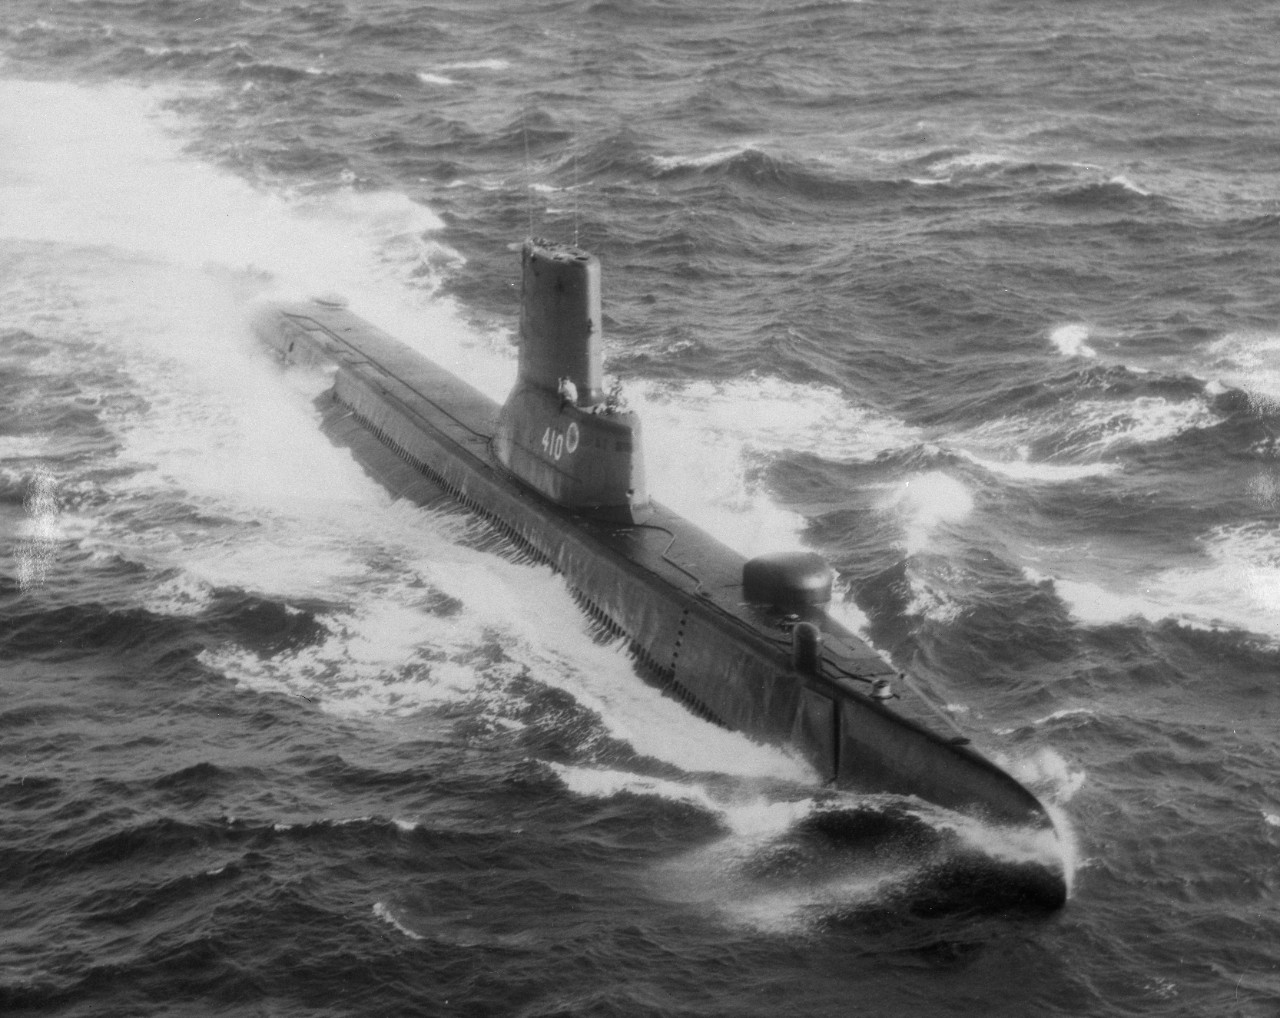 Aerial view of submarine USS Threadfin (SS-410) underway on the surface